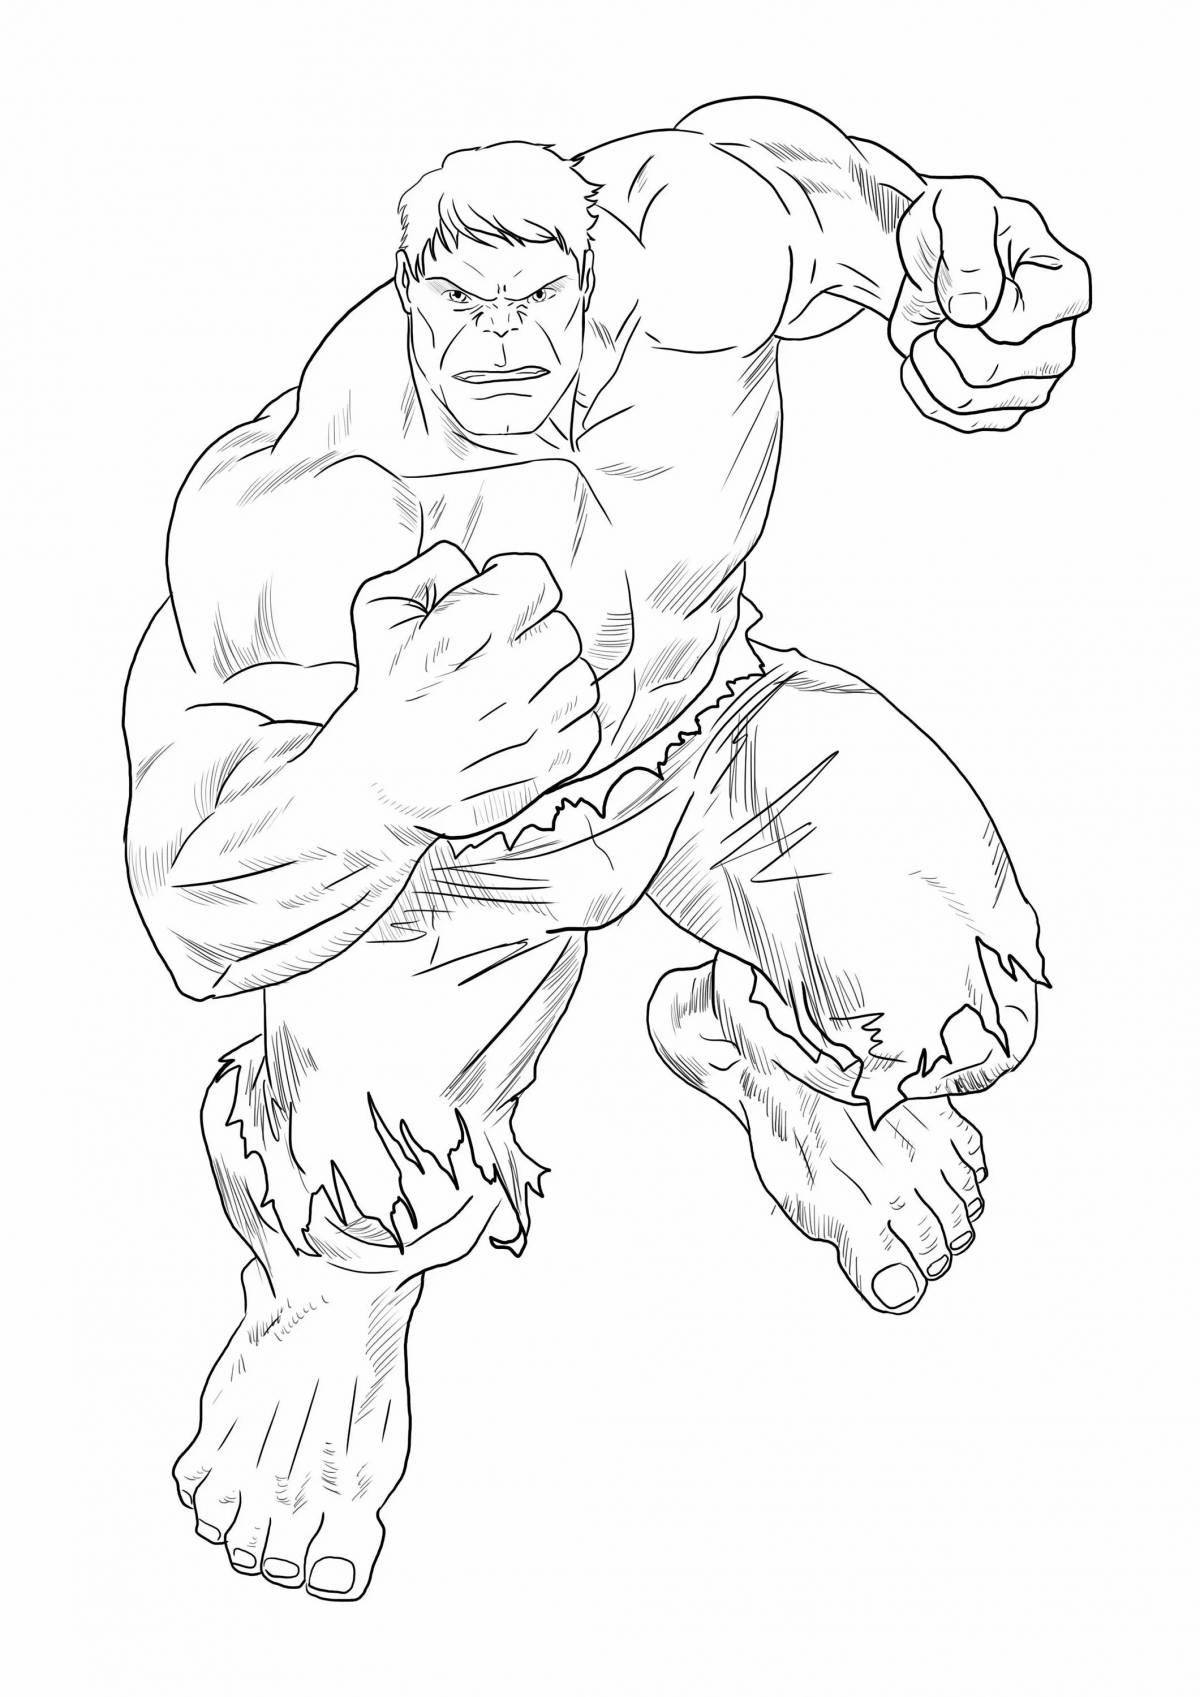 Awesome hulk light coloring page